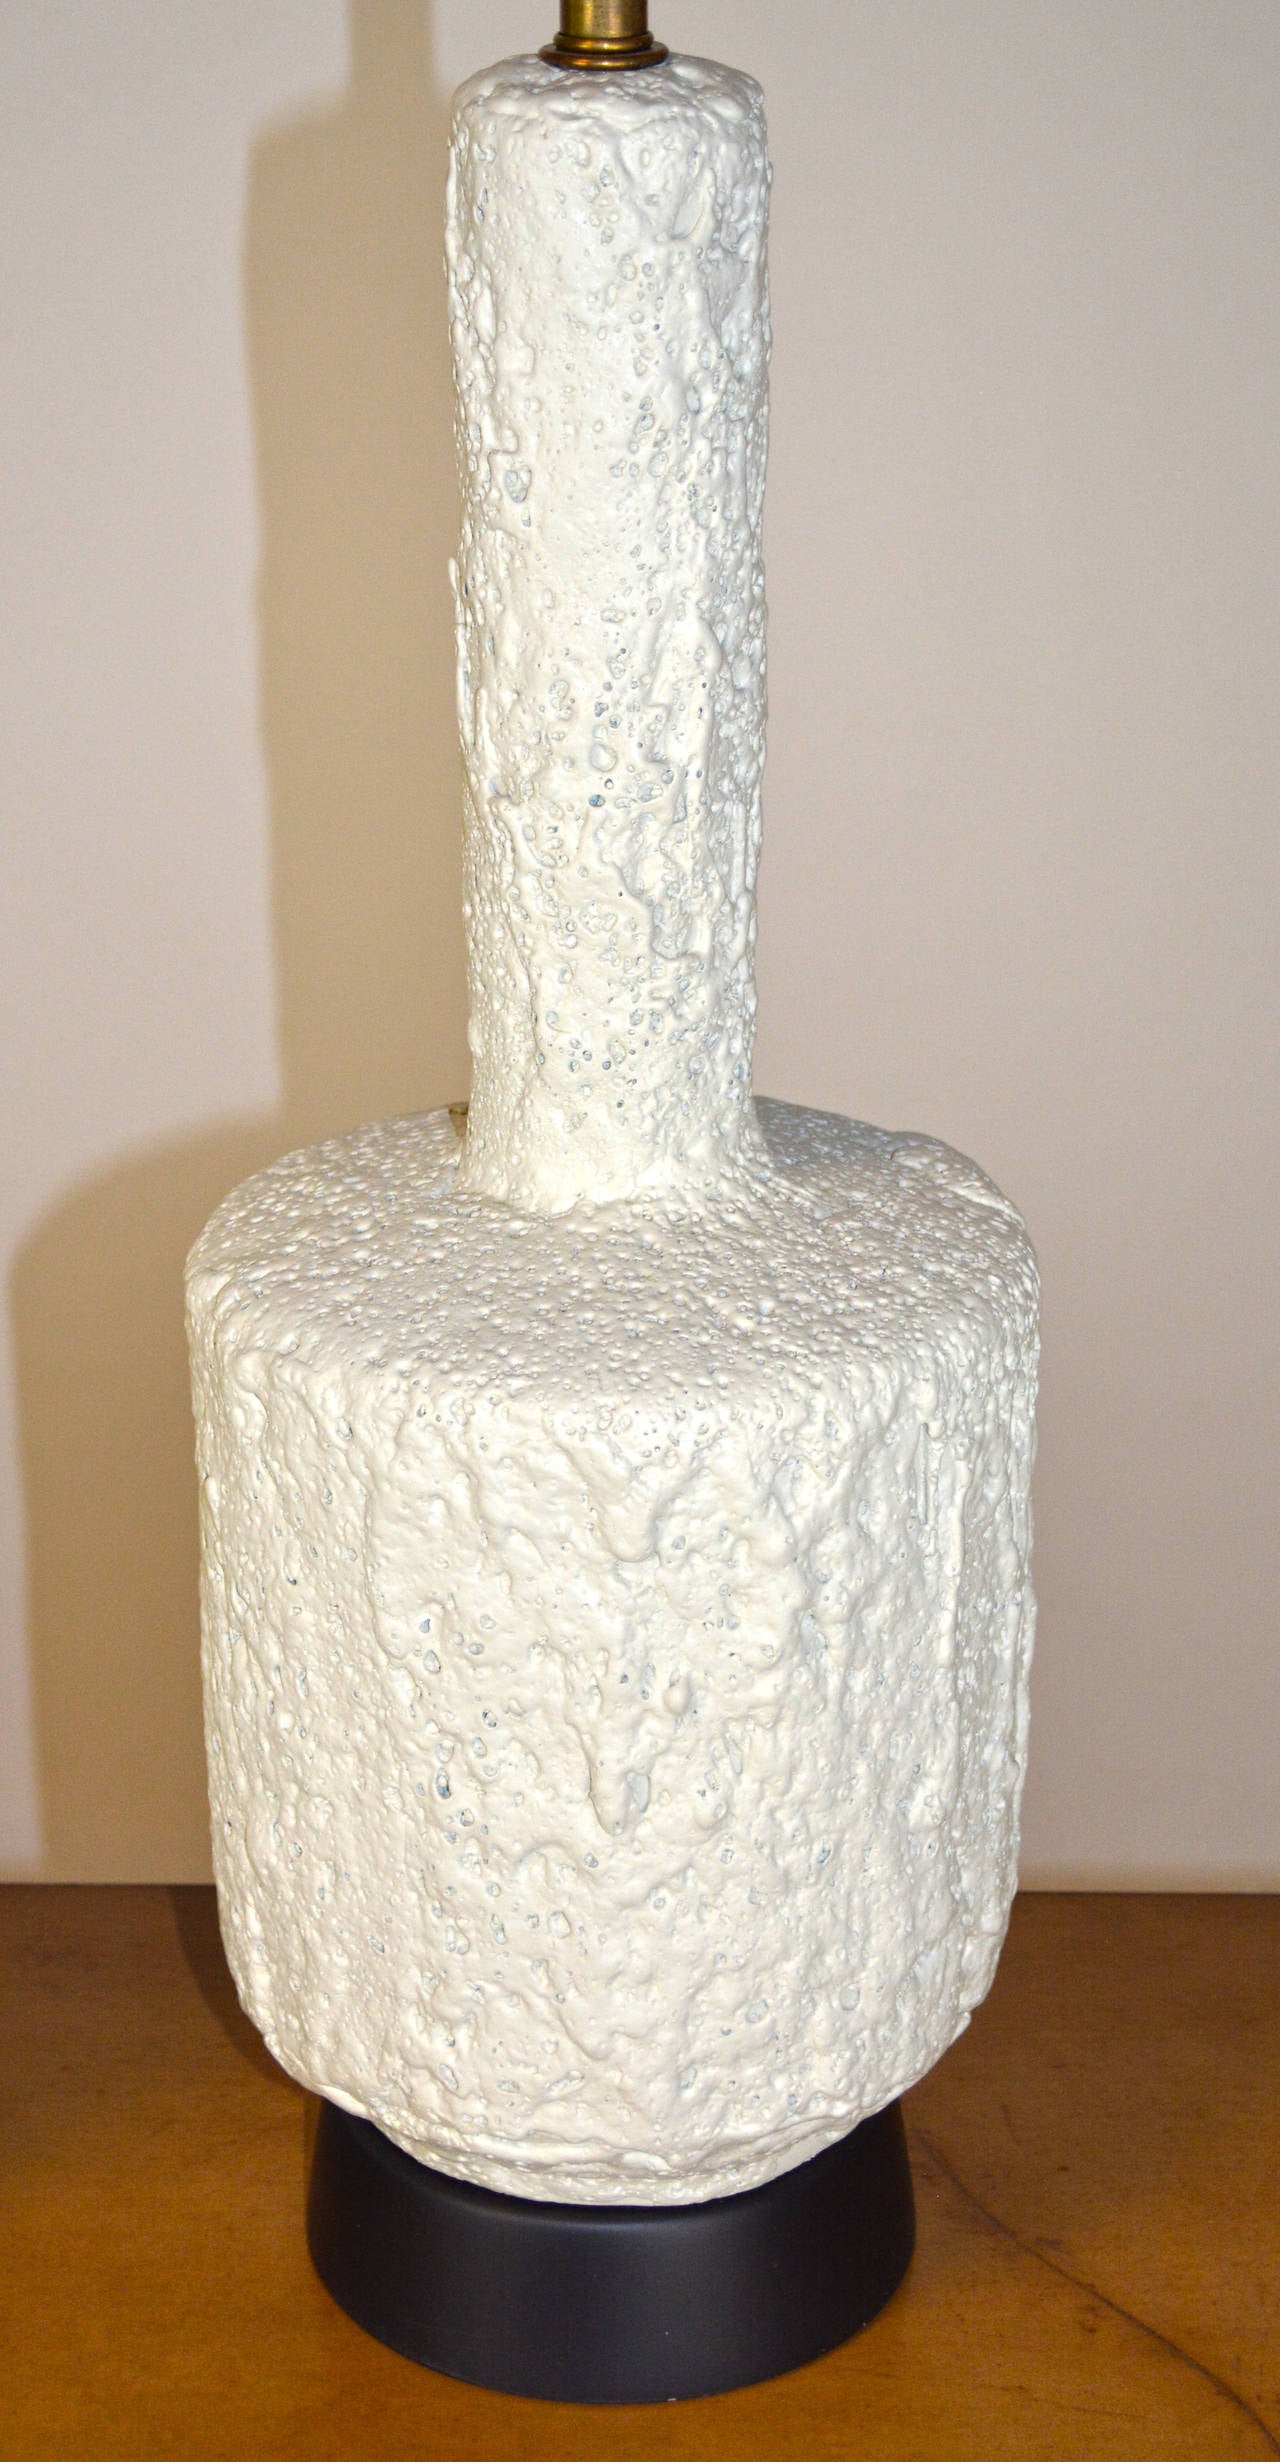 A lovely plaster lamp with a rough texture 'lava' finish, on new black wood base. Shade not included, for display only.